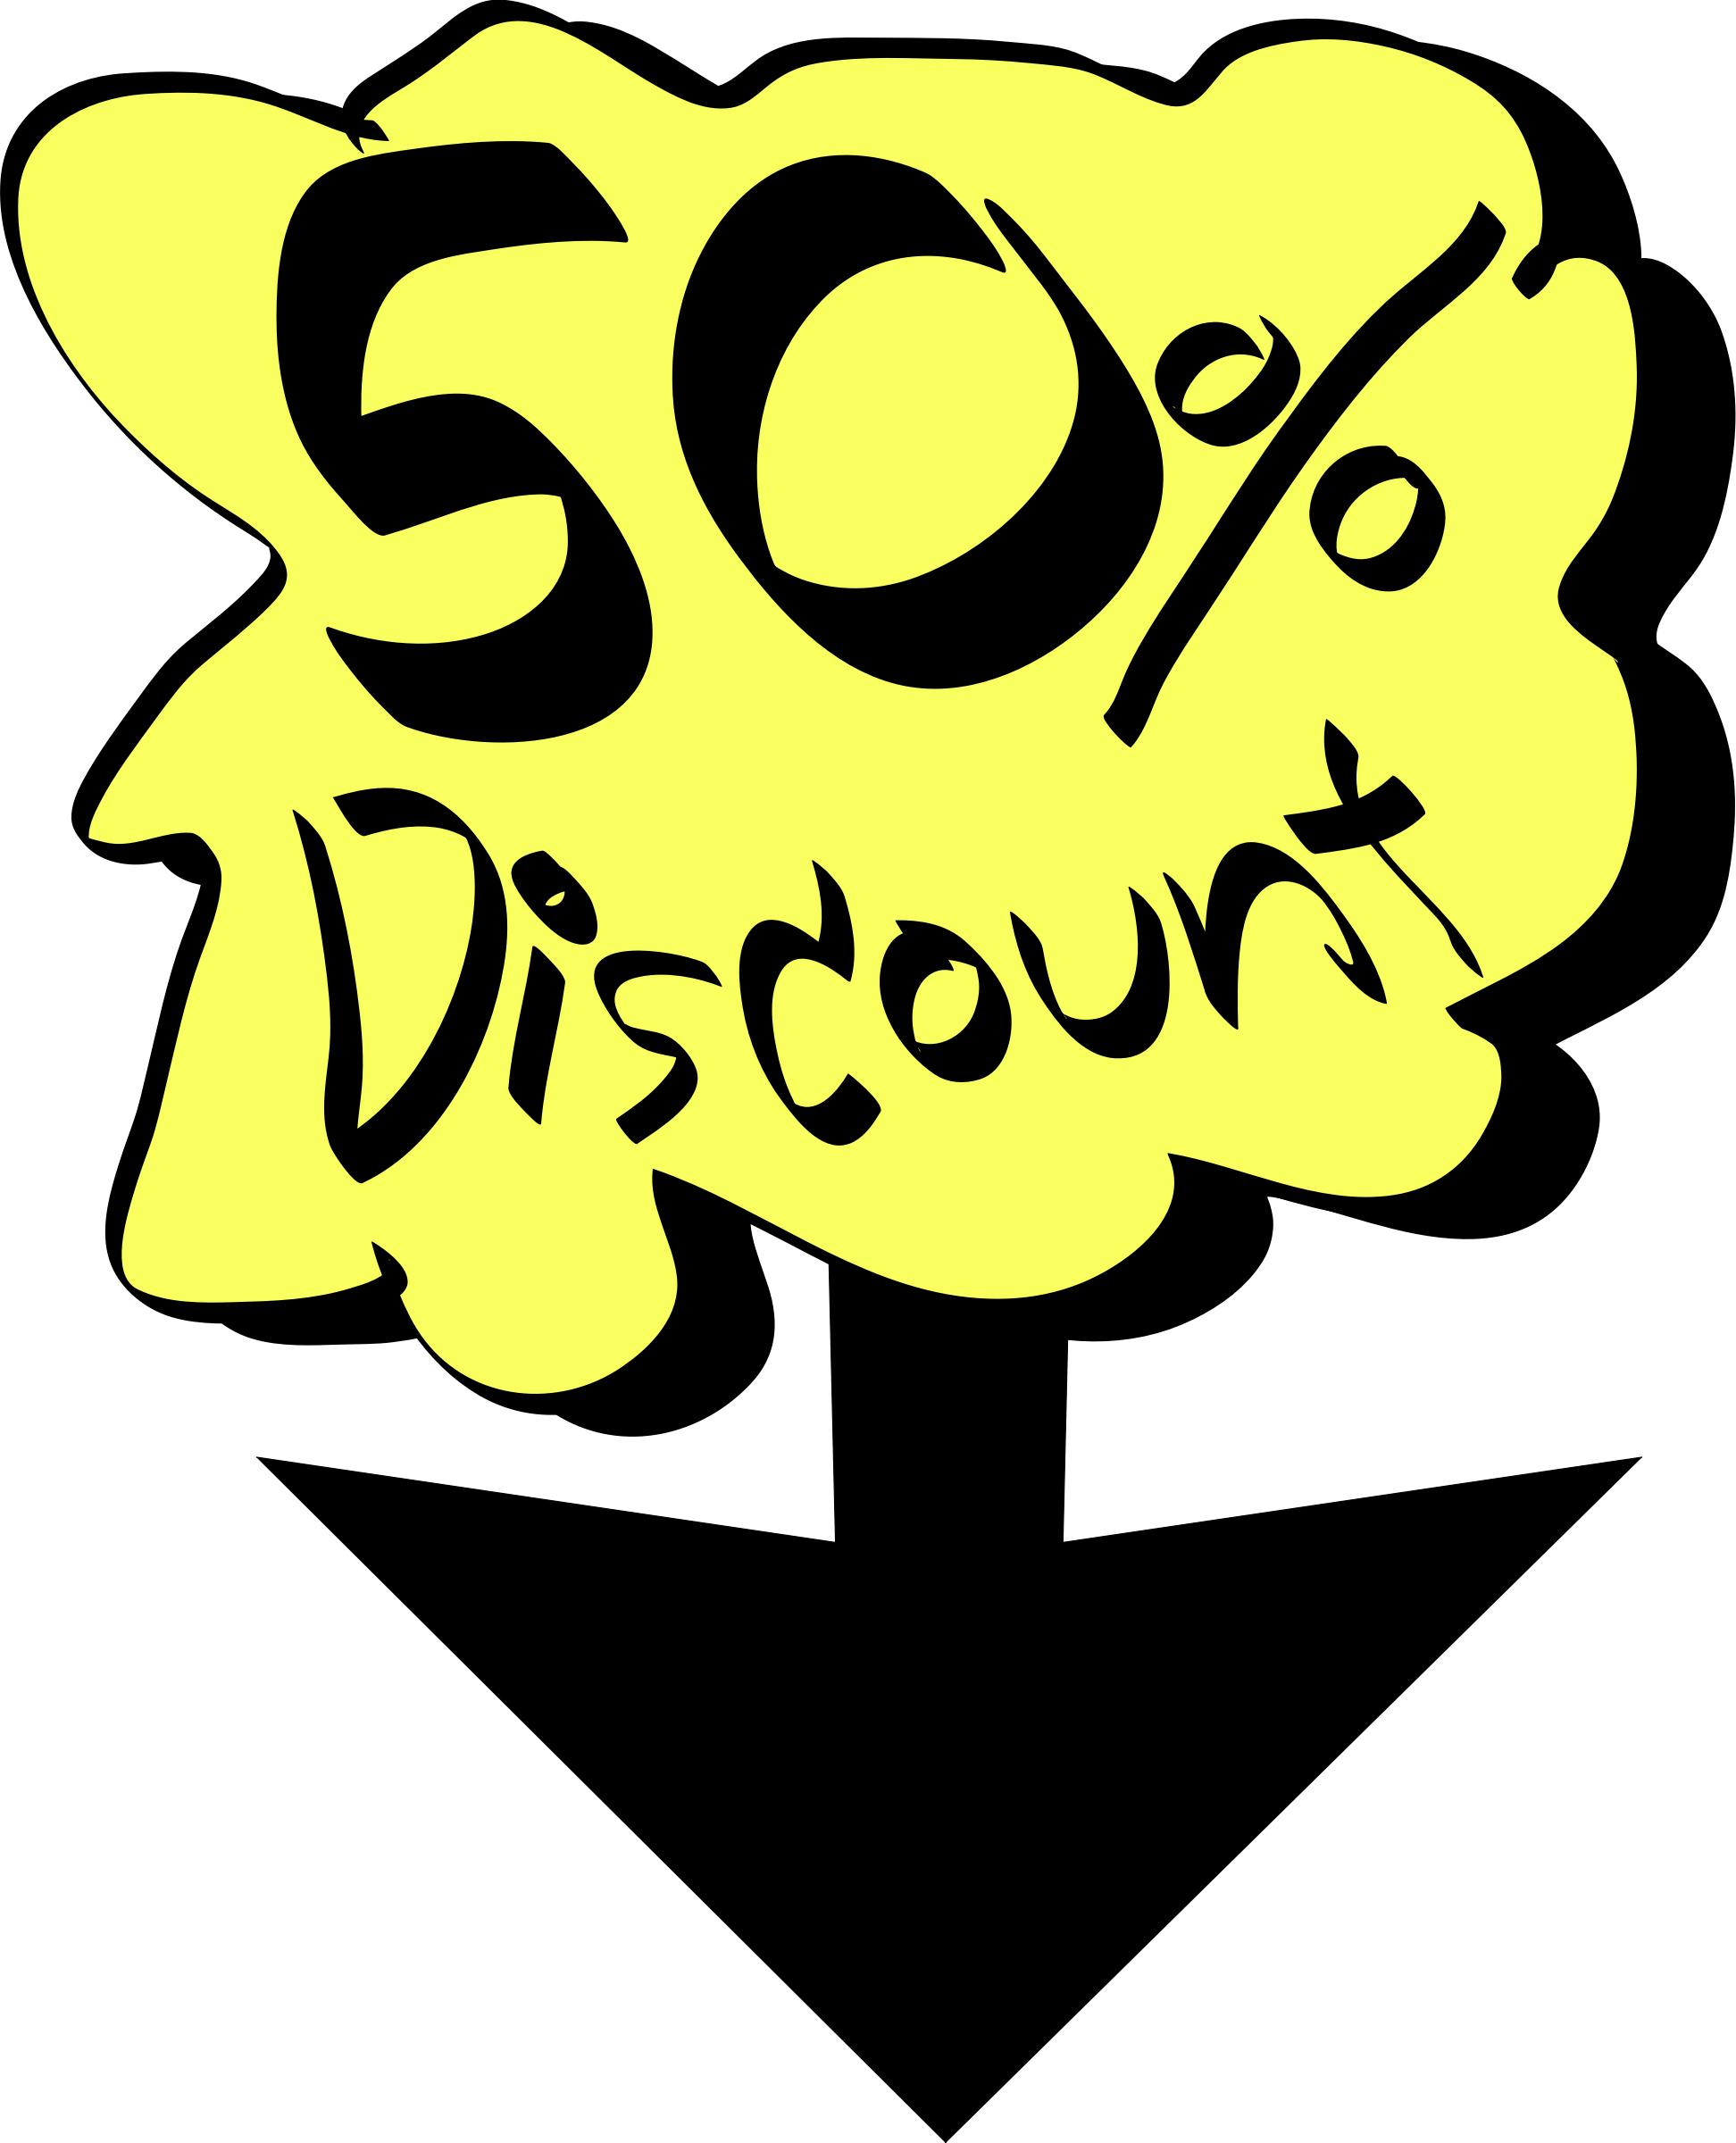 50% Discount png